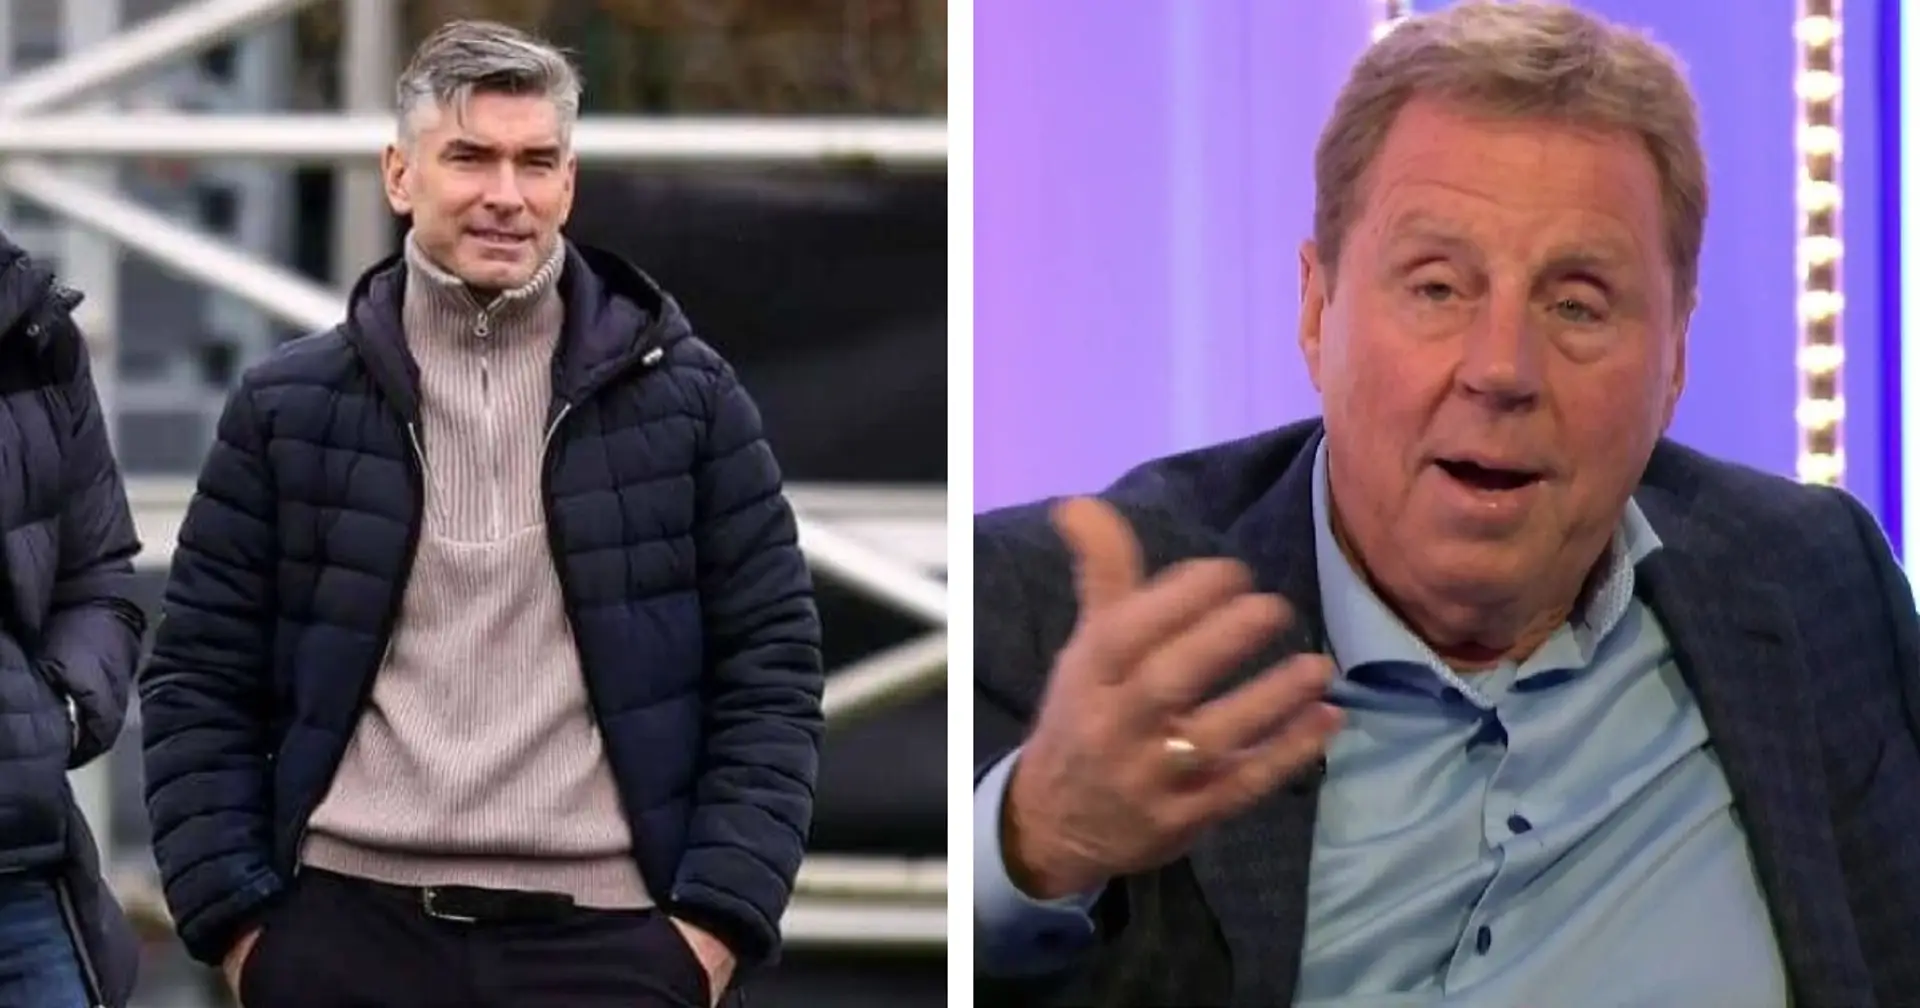 'Name a player, he'll tell you what they had for dinner last night': Redknapp on what to expect from new LFC director